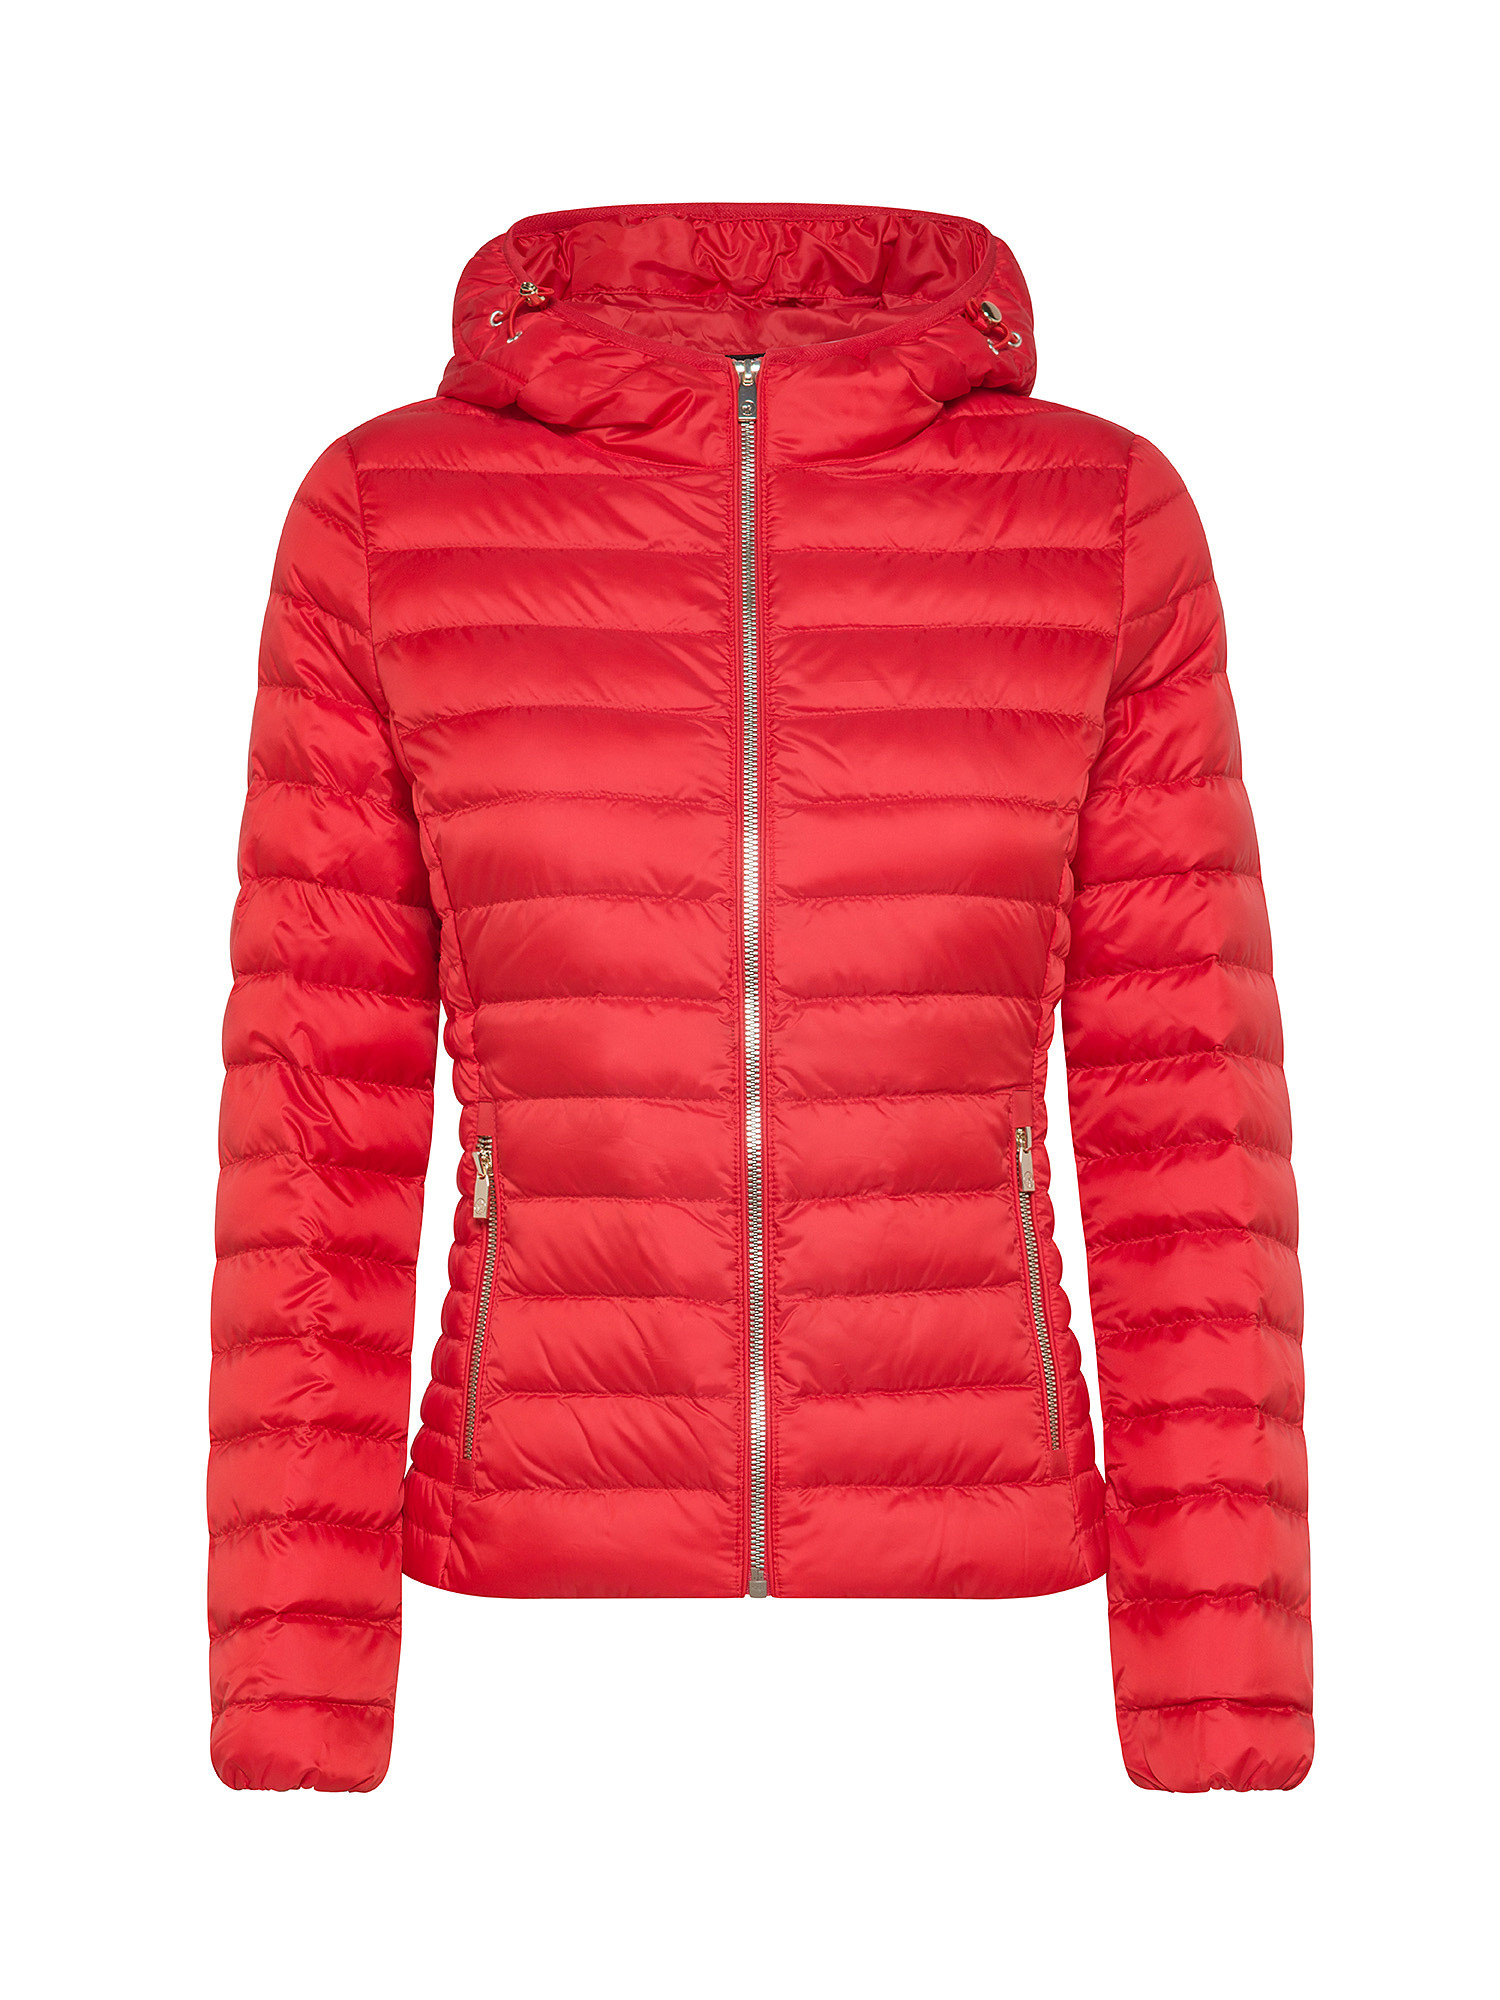 Ciesse Piumini - Carrie down jacket with hood, Red, large image number 0